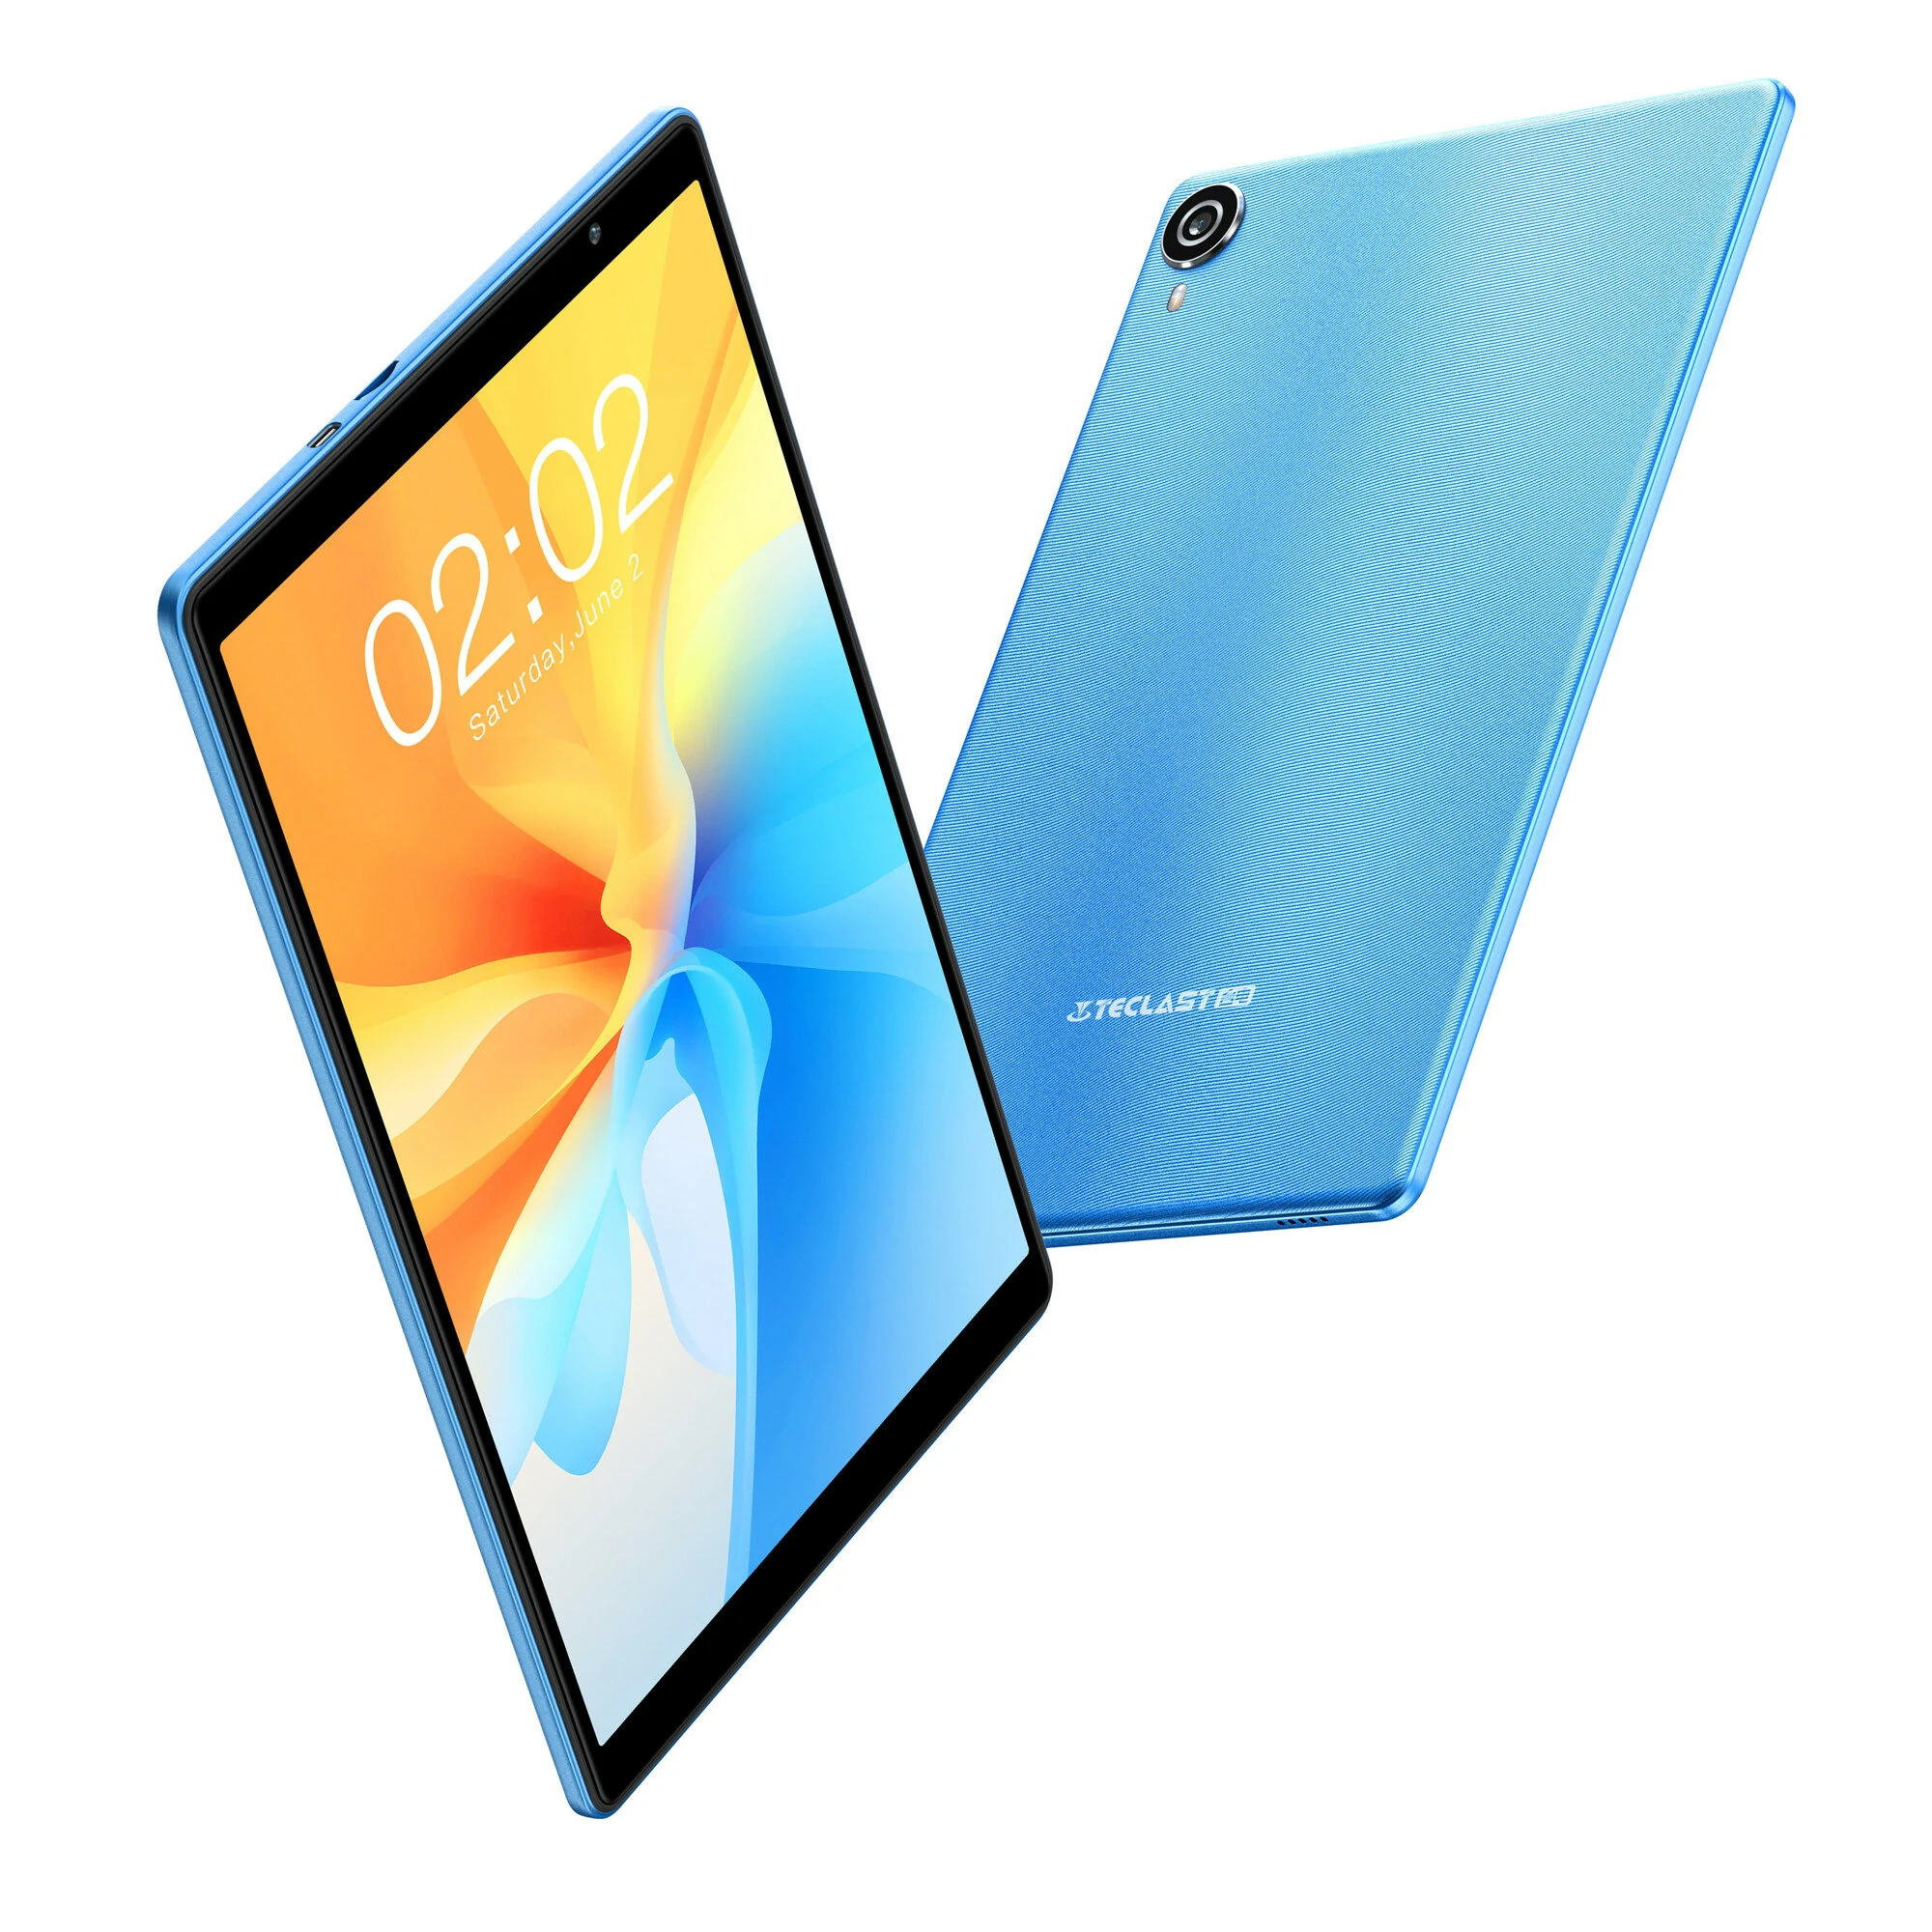 Teclast P25T – cheap quad-core tablet with an 10-inch display